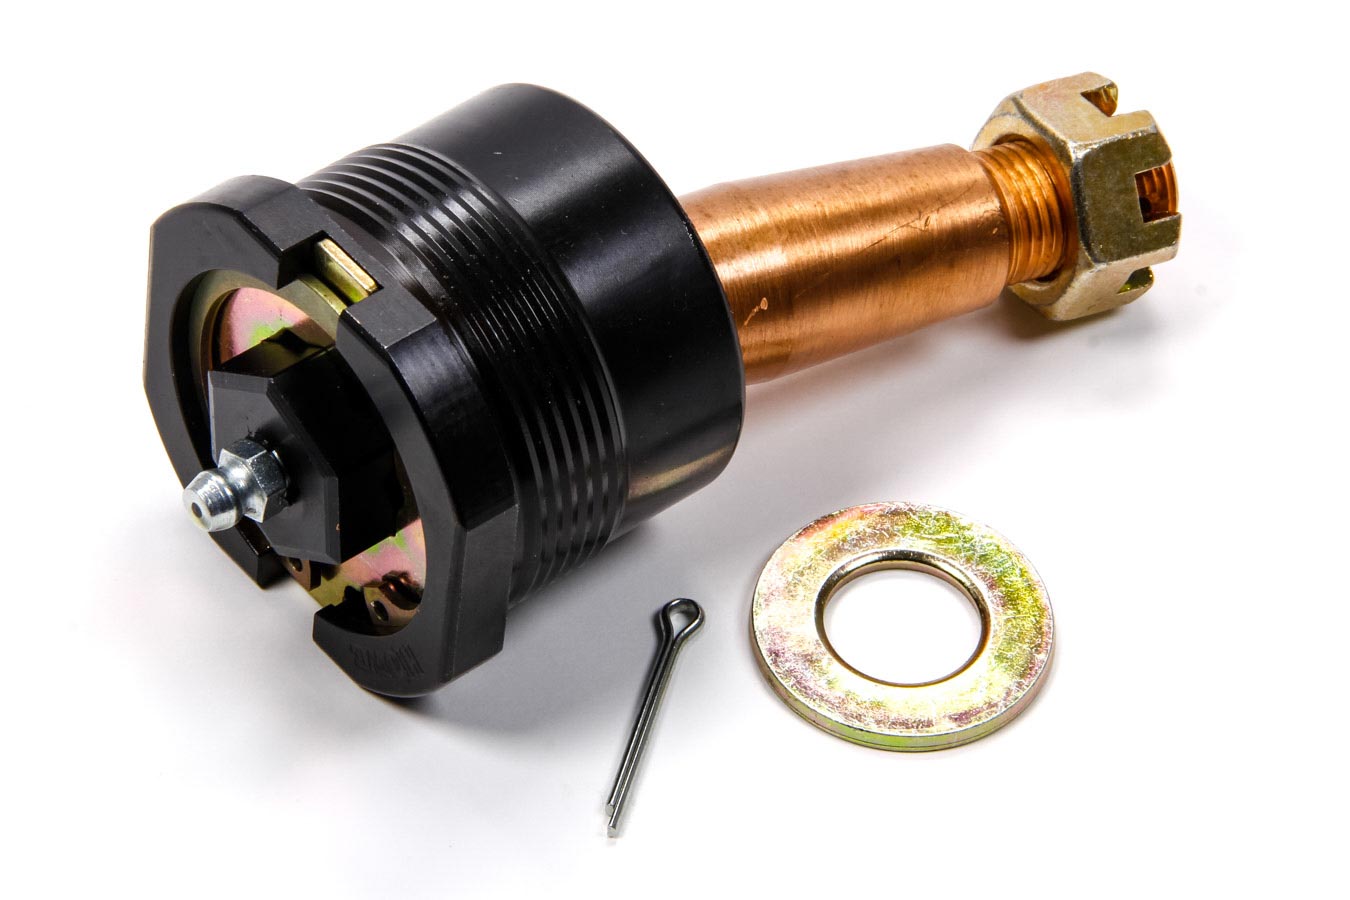 Shop for Spindles, Ball Joints and Components :: Racecar Engineering